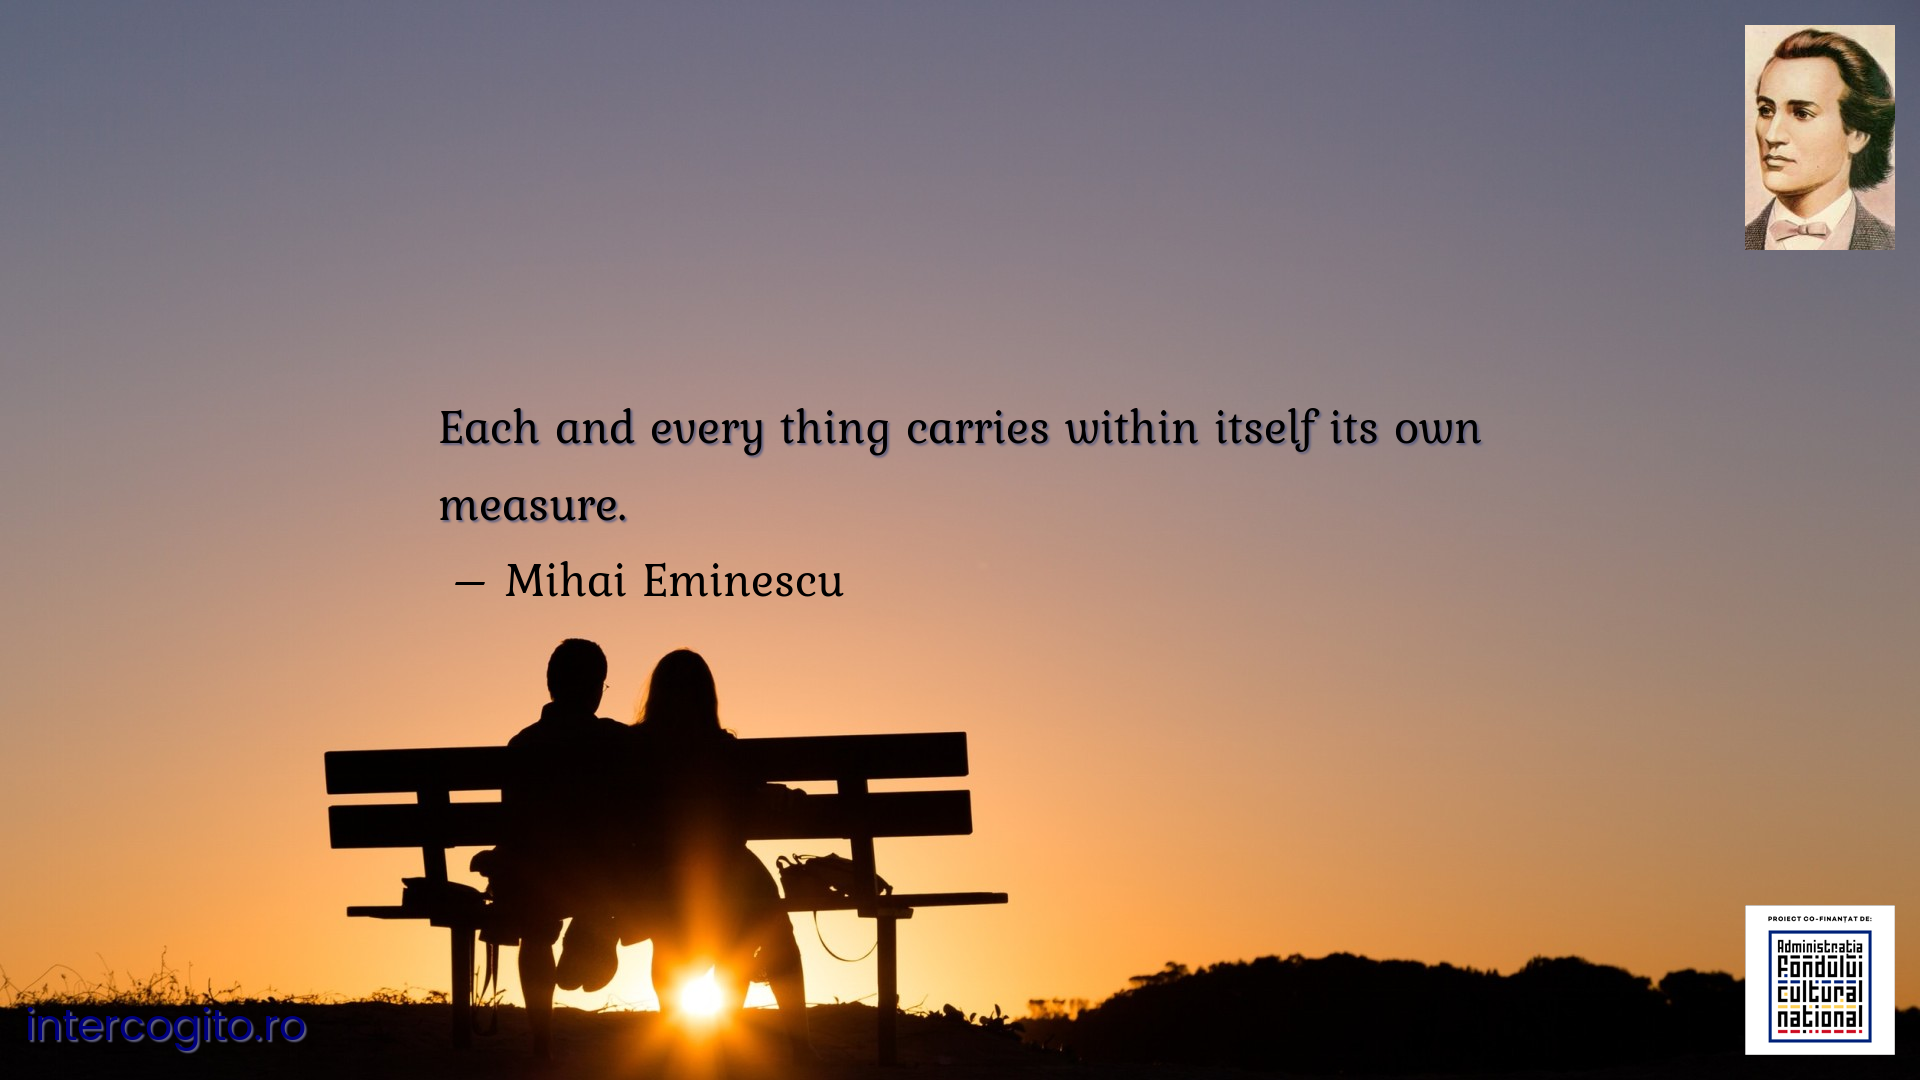 Each and every thing carries within itself its own measure.